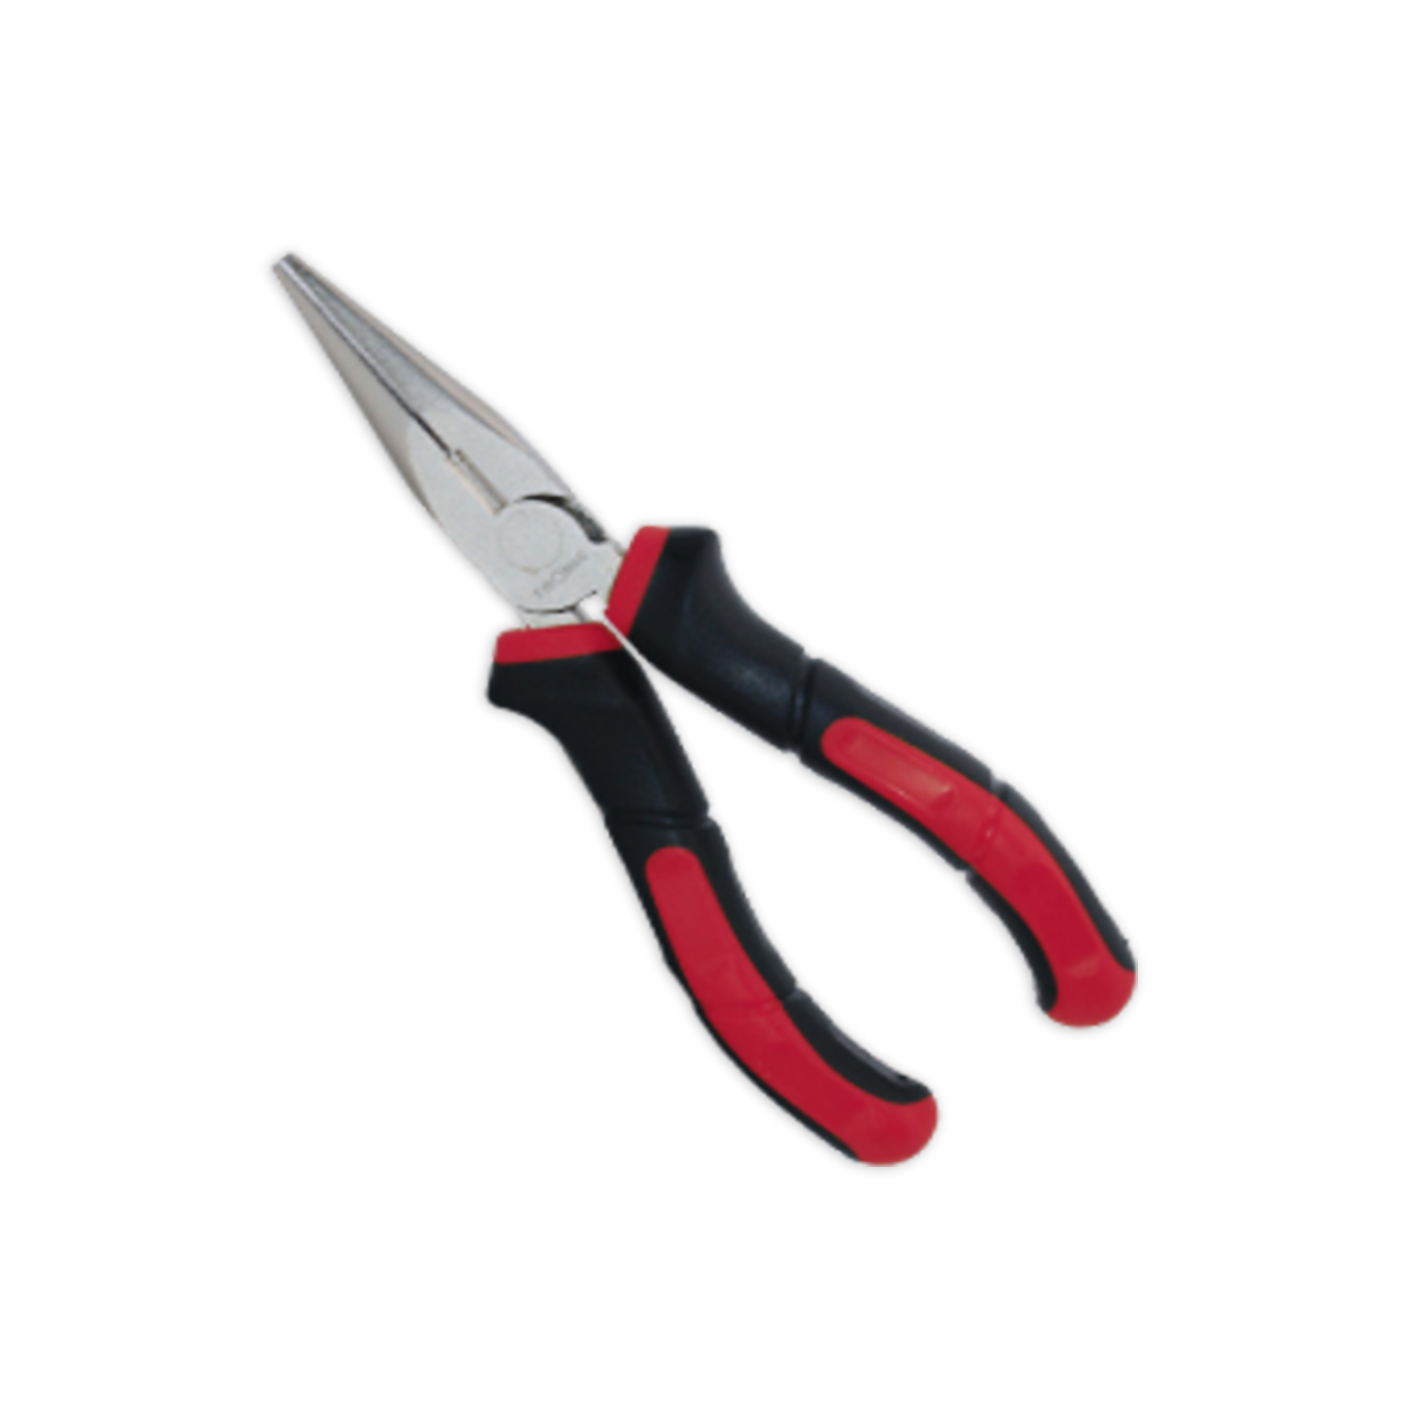 Tronic 6 Inch Long Nose Pliers HT LN06 at the Blea Store